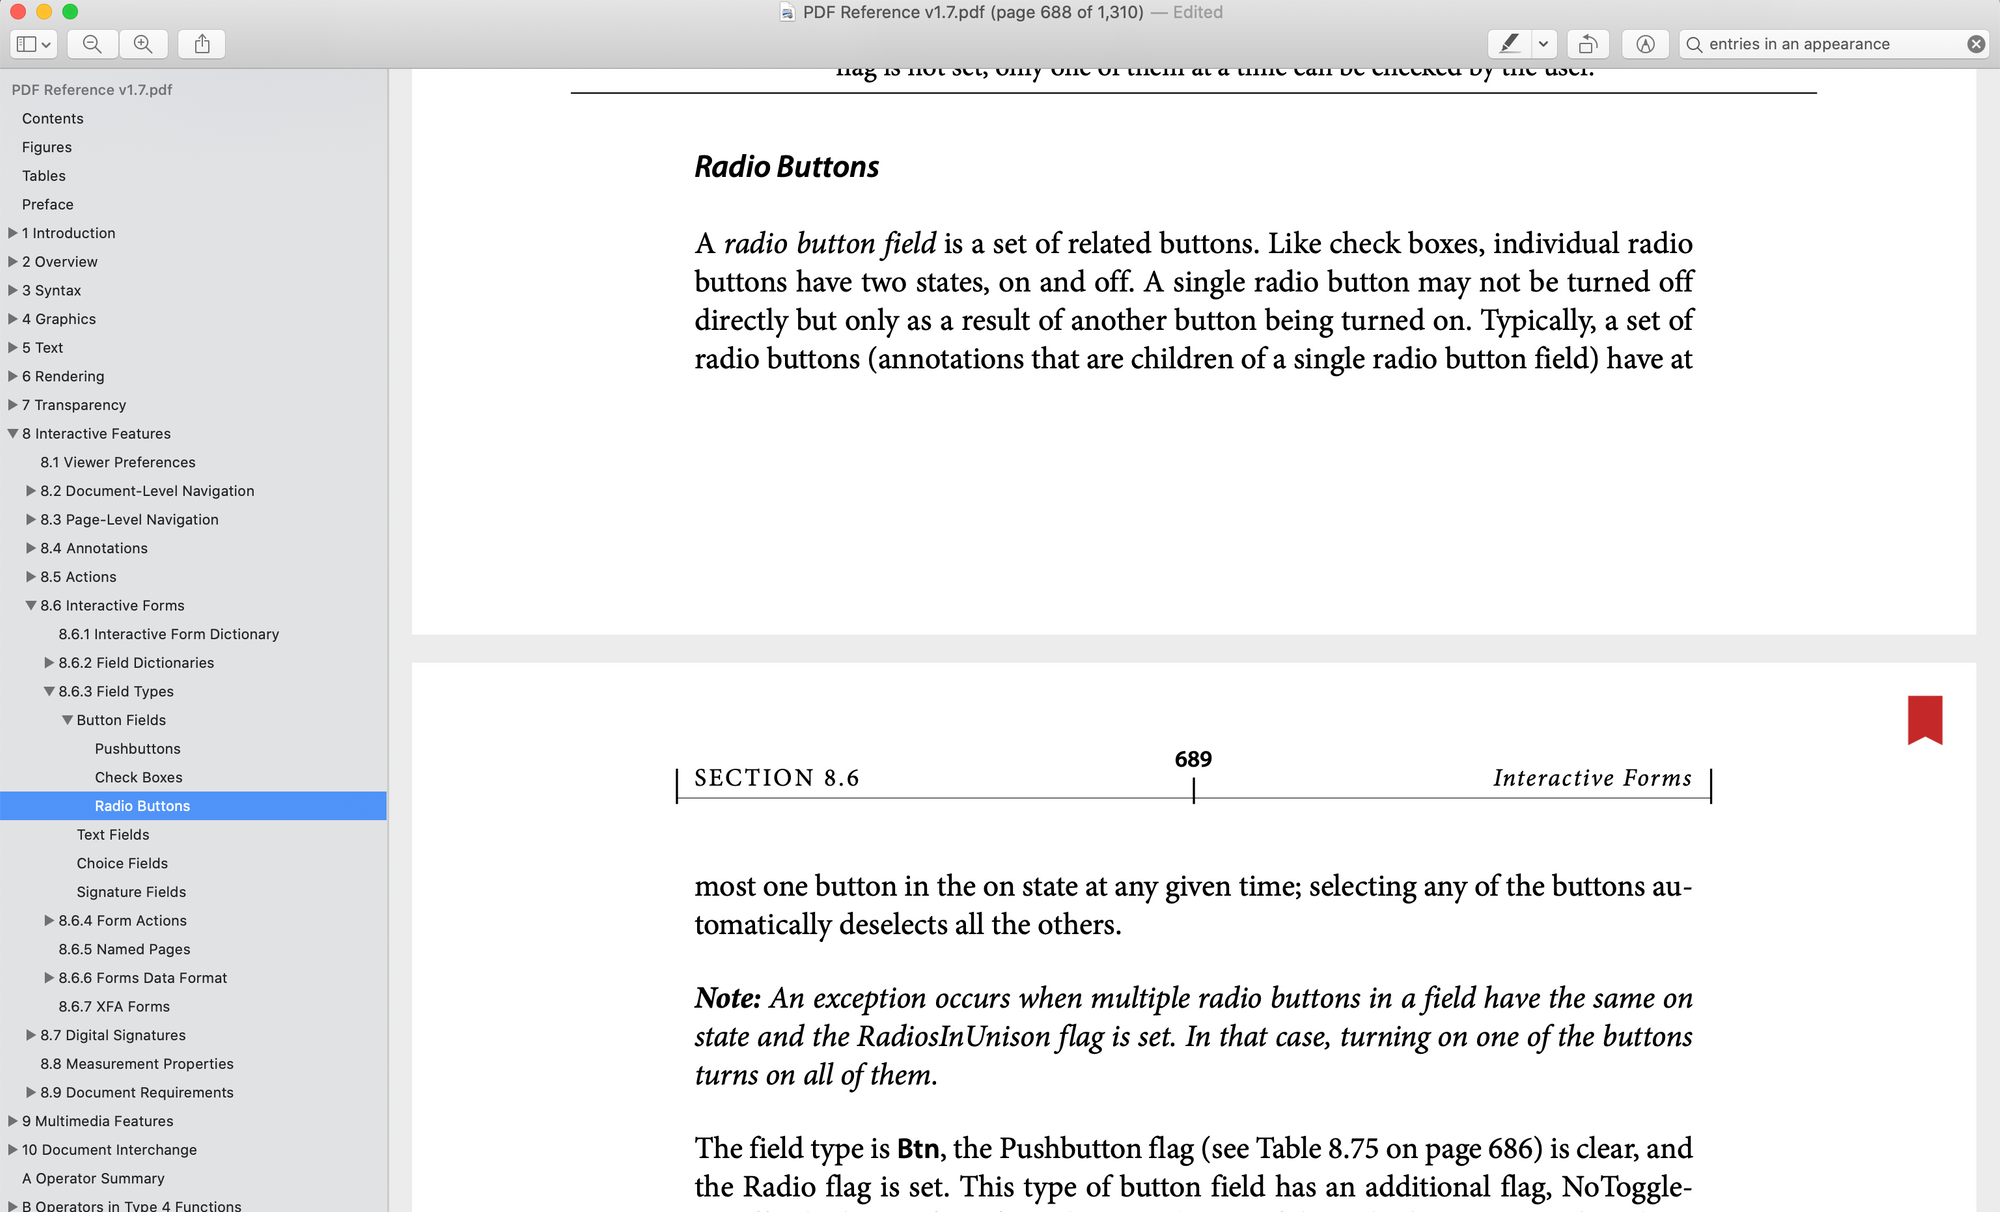 How to Debug Weird PDFs